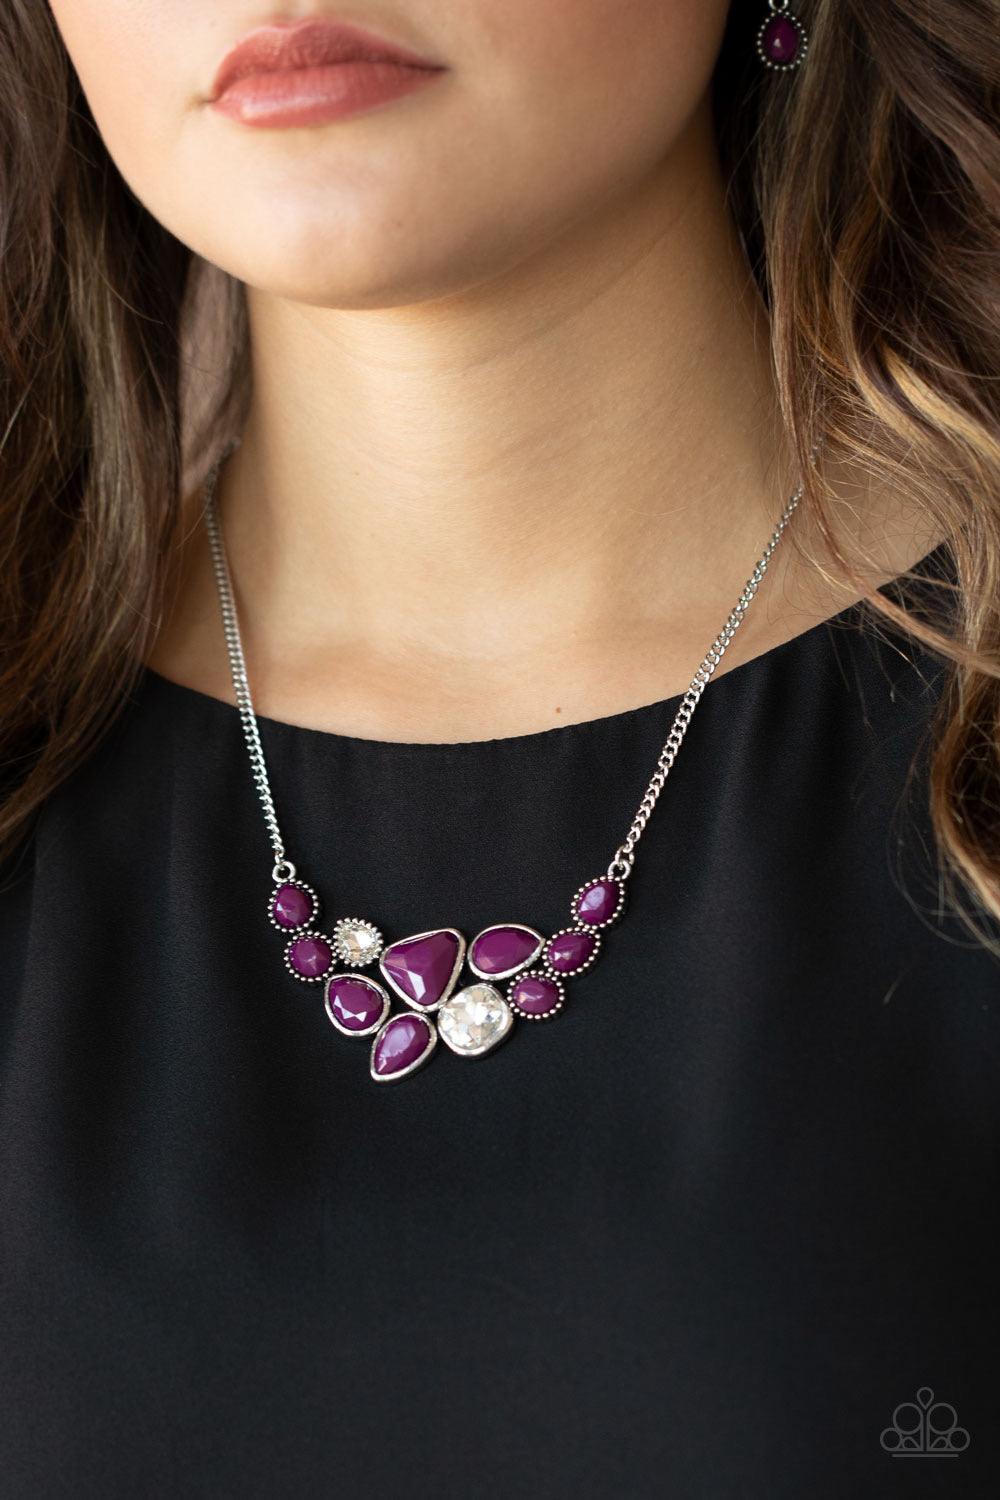 Paparazzi Accessories Breathtaking Brilliance - Purple Featuring smooth and studded silver frames, a collection of teardrop, oval, and triangular plum beads coalesce with matching white rhinestones below the collar for a glamorous pop of collar. Features